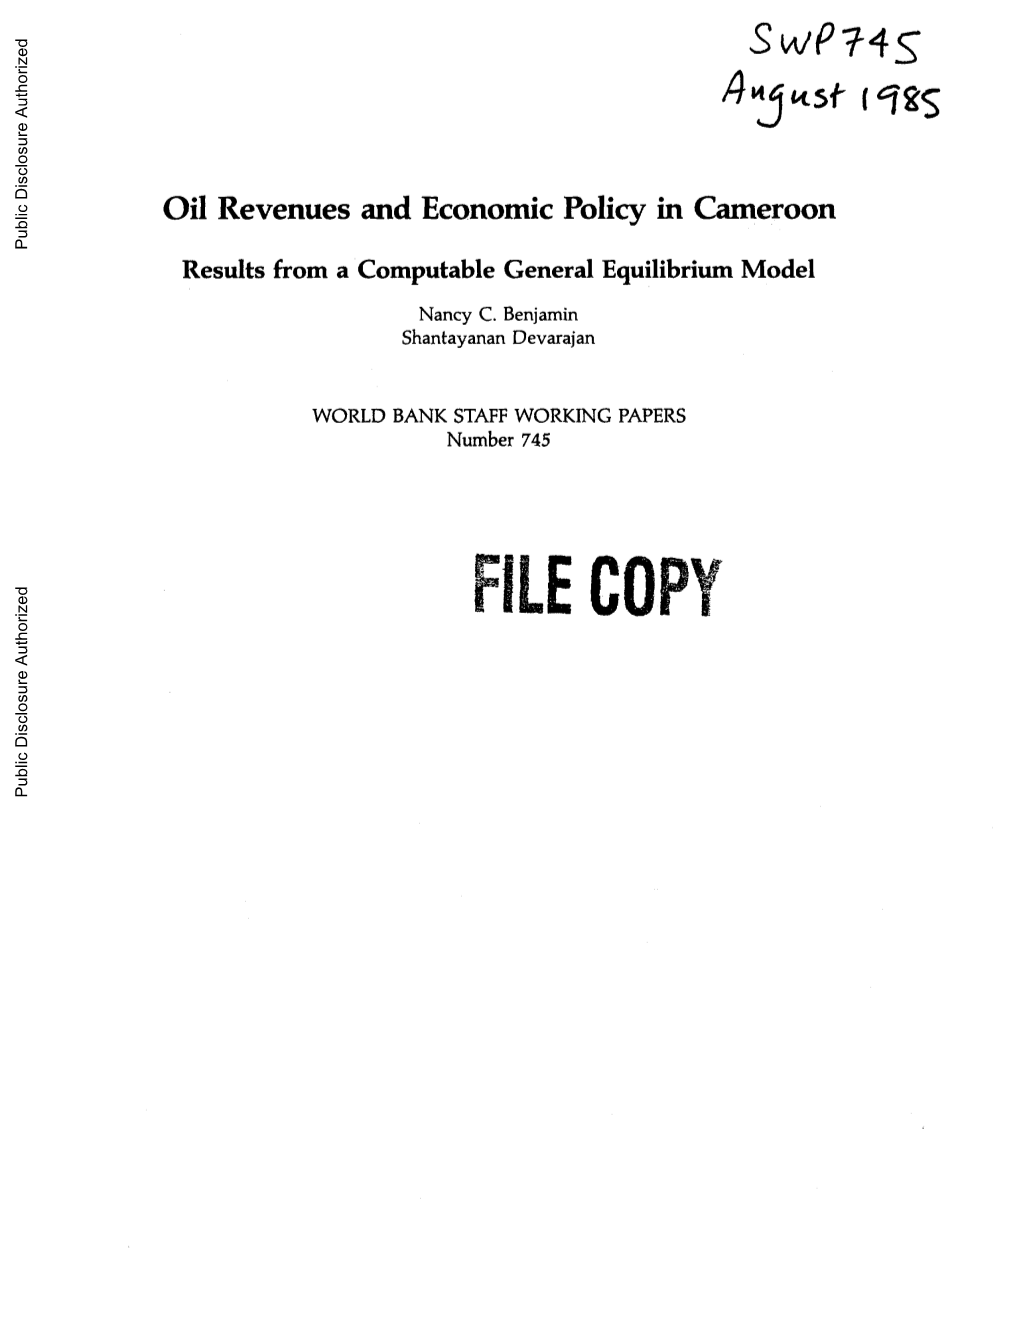 Oil Revenues and Economic Policy in Cameroon Public Disclosure Authorized Results from a Computable General Equilibrium Model